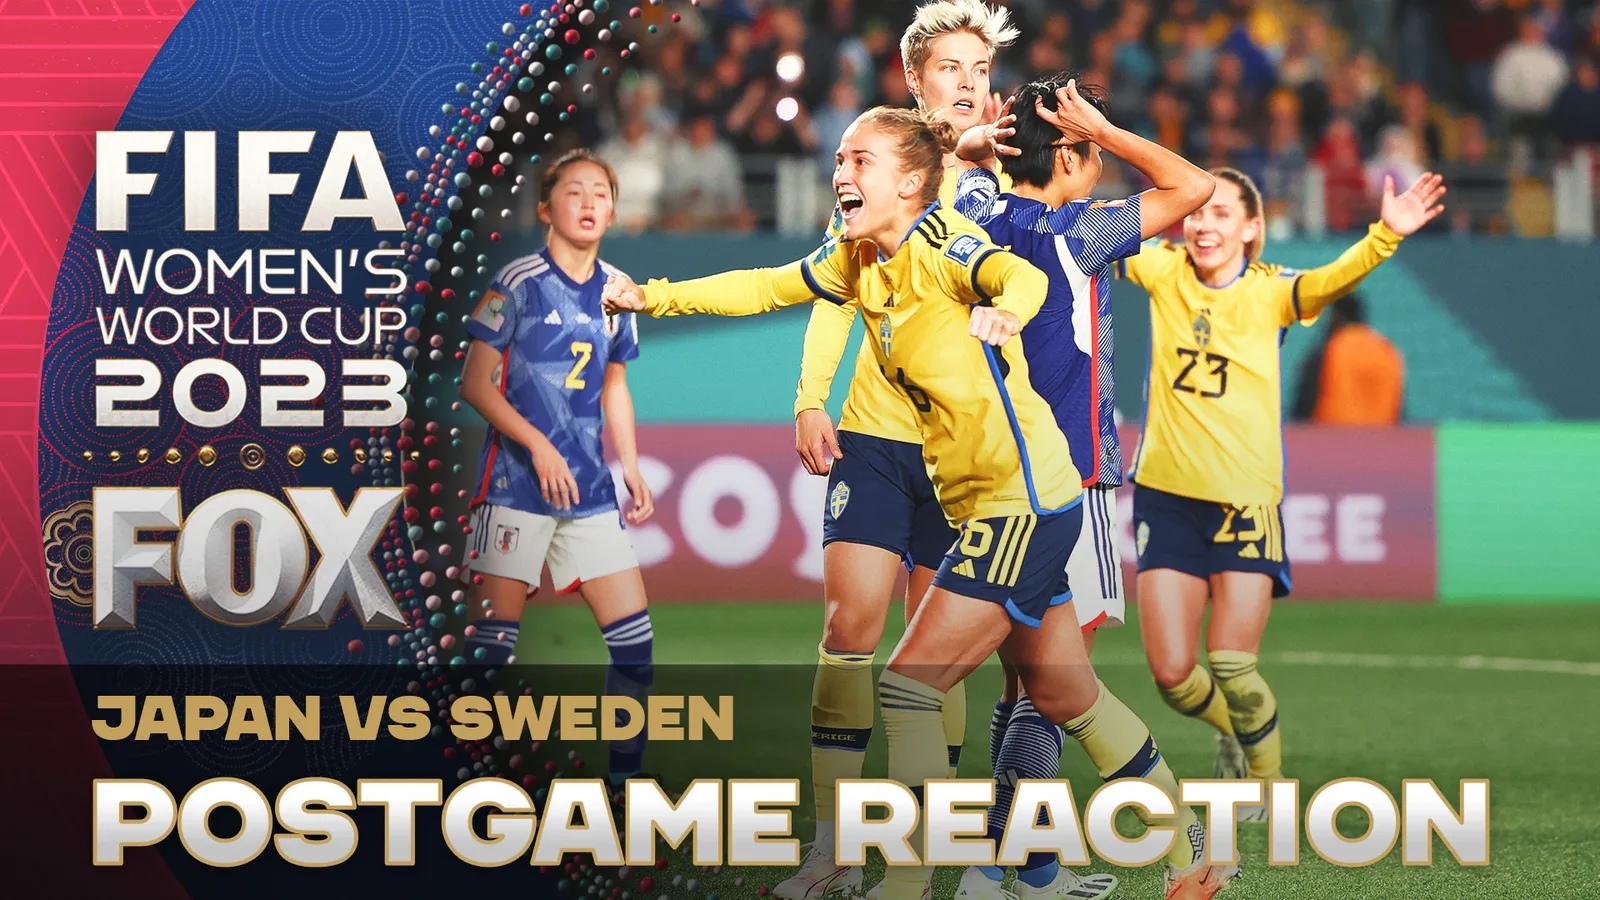 Reactions to Sweden upsetting Japan in the quarterfinals 